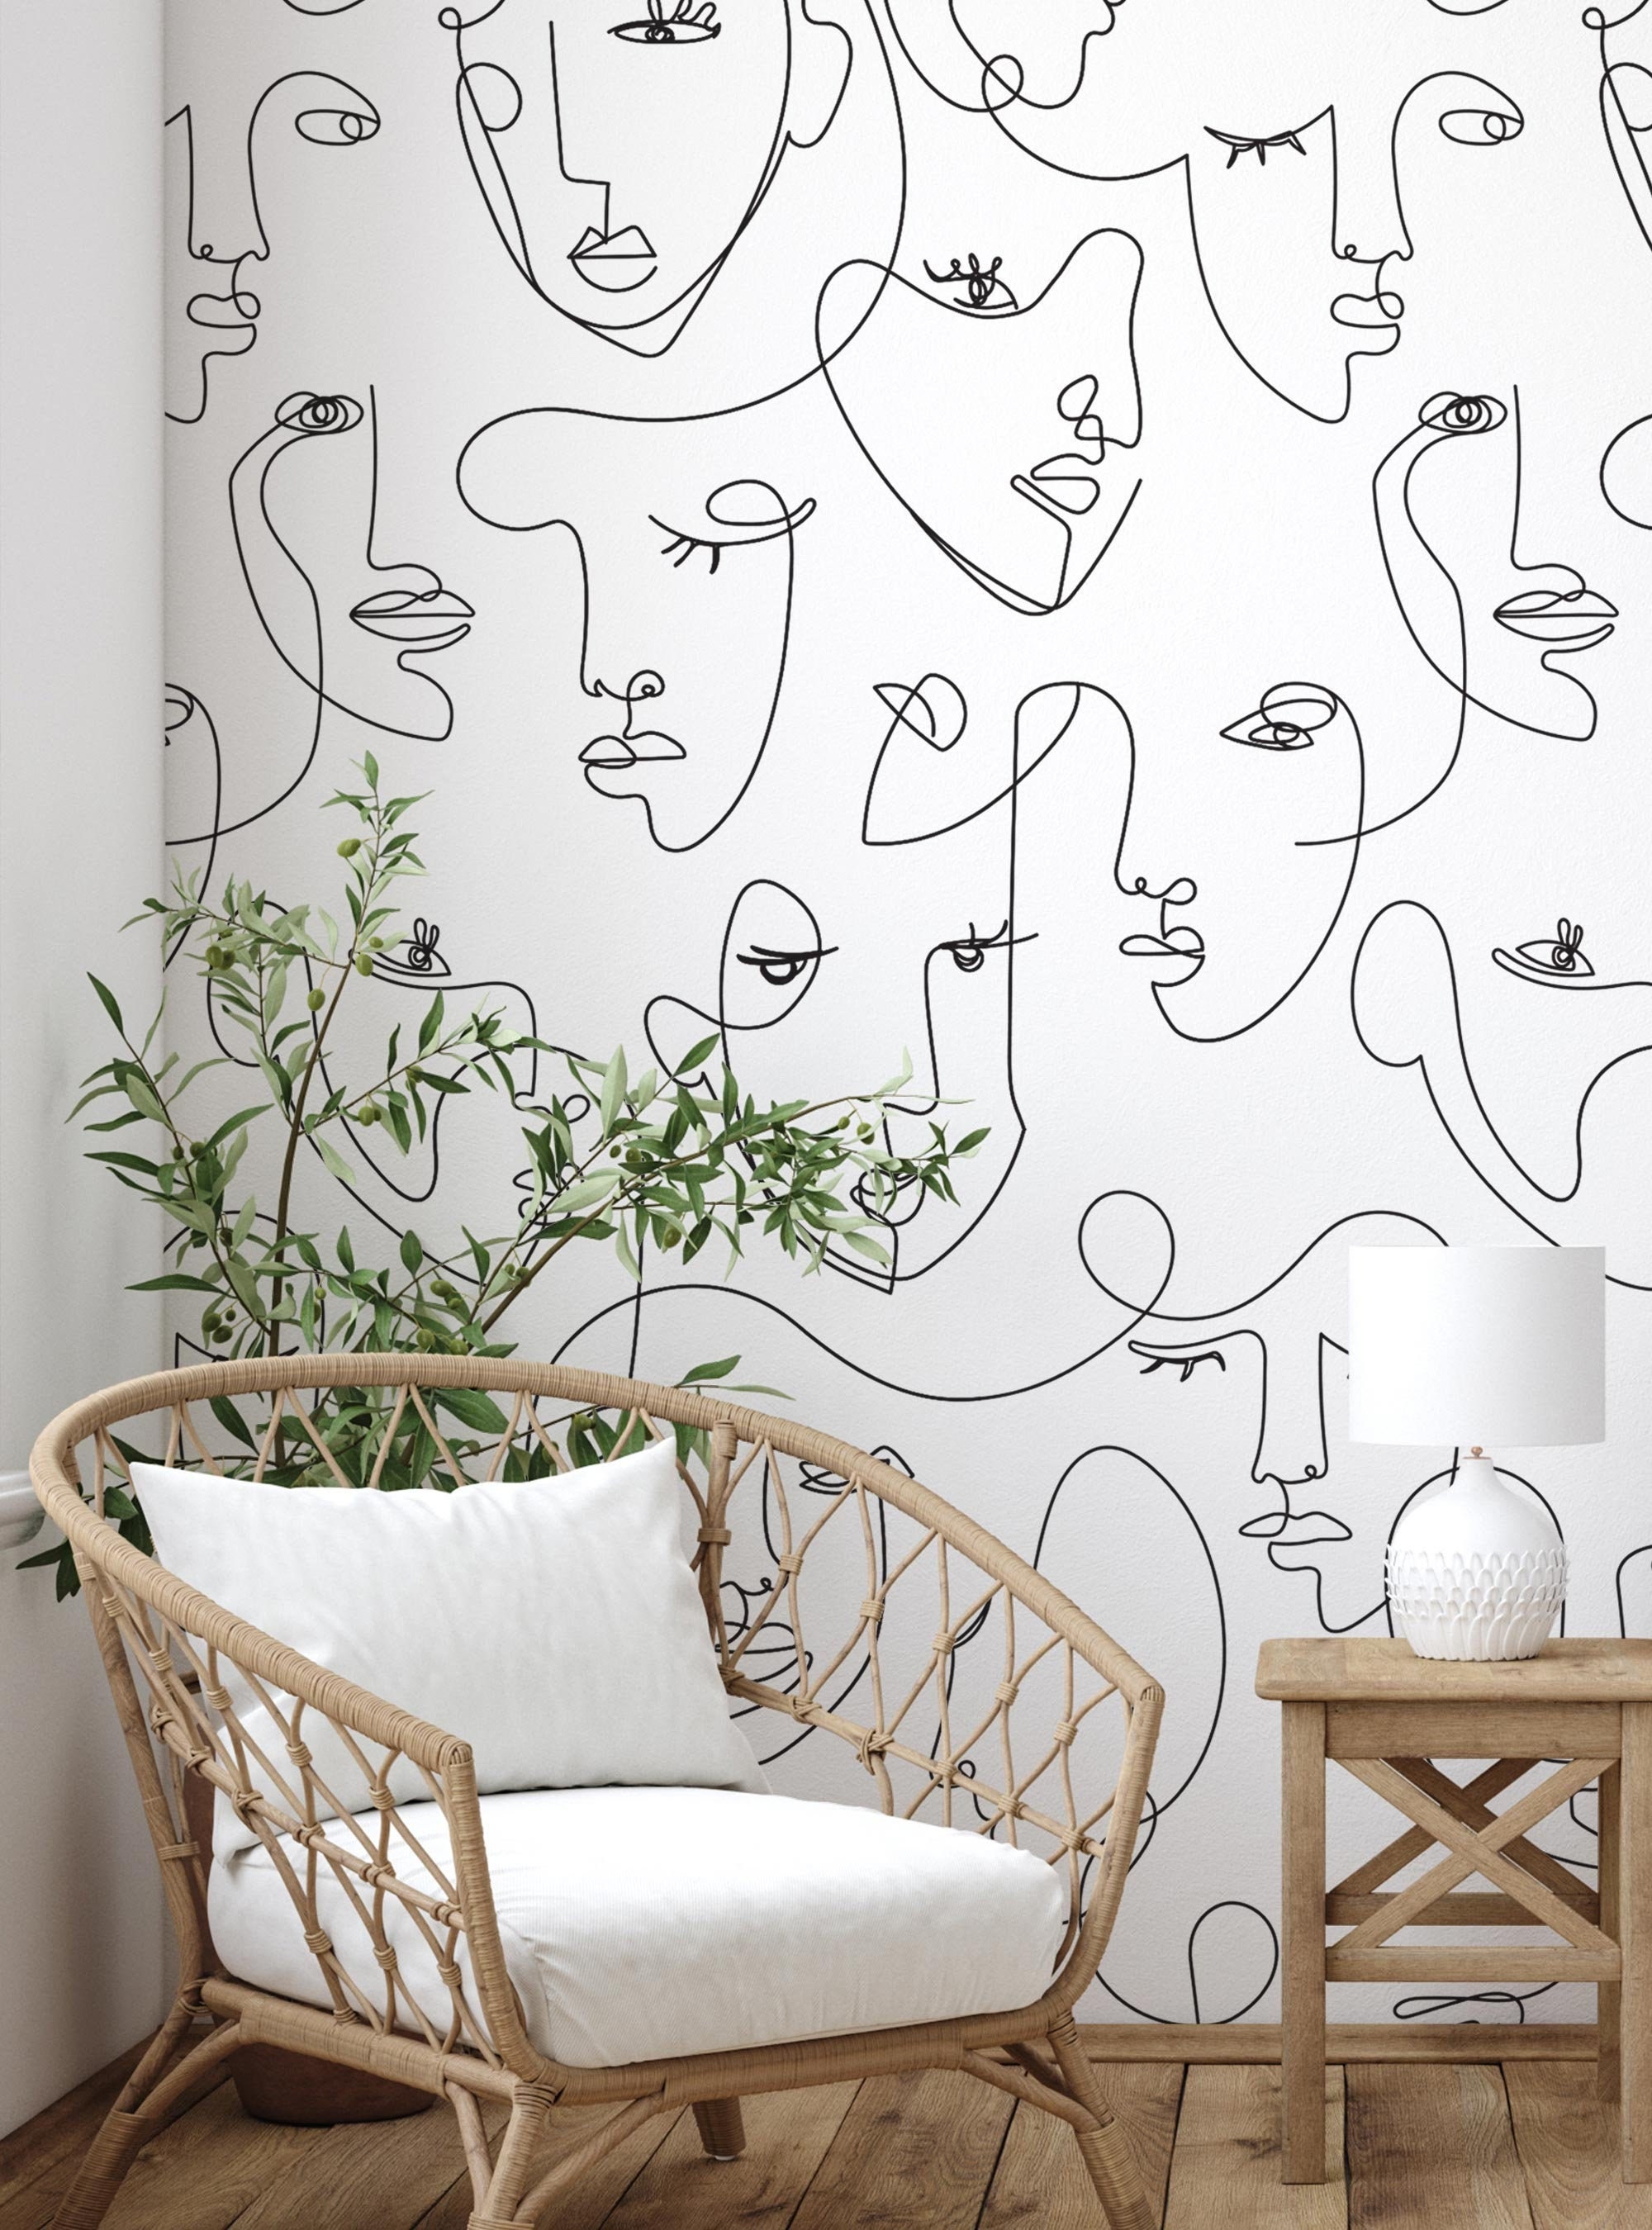 Wallpaper Peel and Stick The Word Love is Hand Drawn and Written in Various  Styles for a Large Wall Mural Removable Sticker Vinyl Film Covering Self